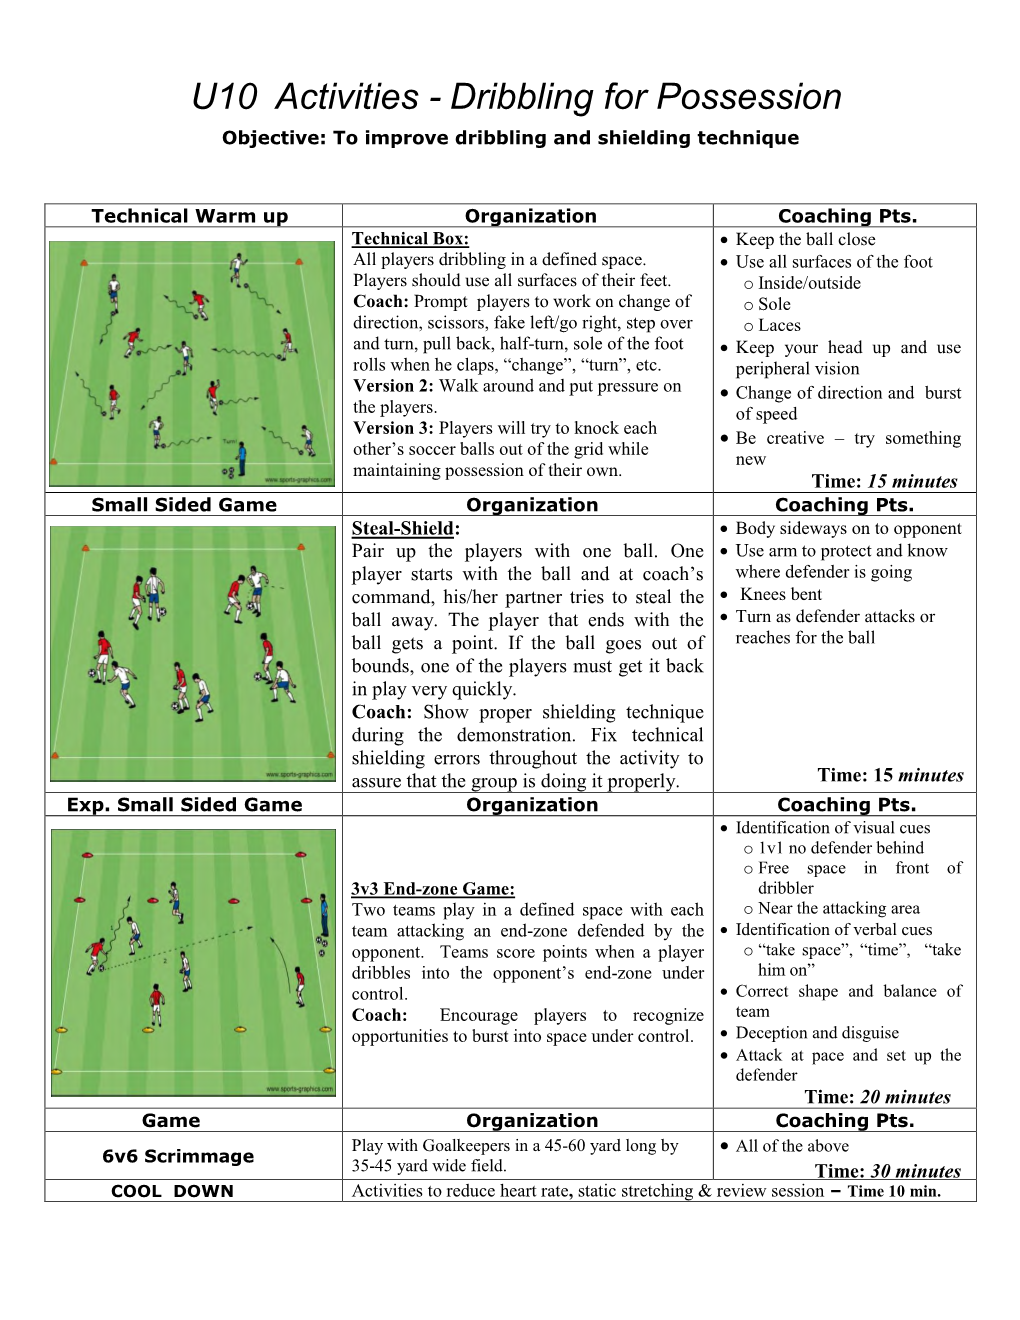 U10 Activities - Dribbling for Possession Objective: to Improve Dribbling and Shielding Technique